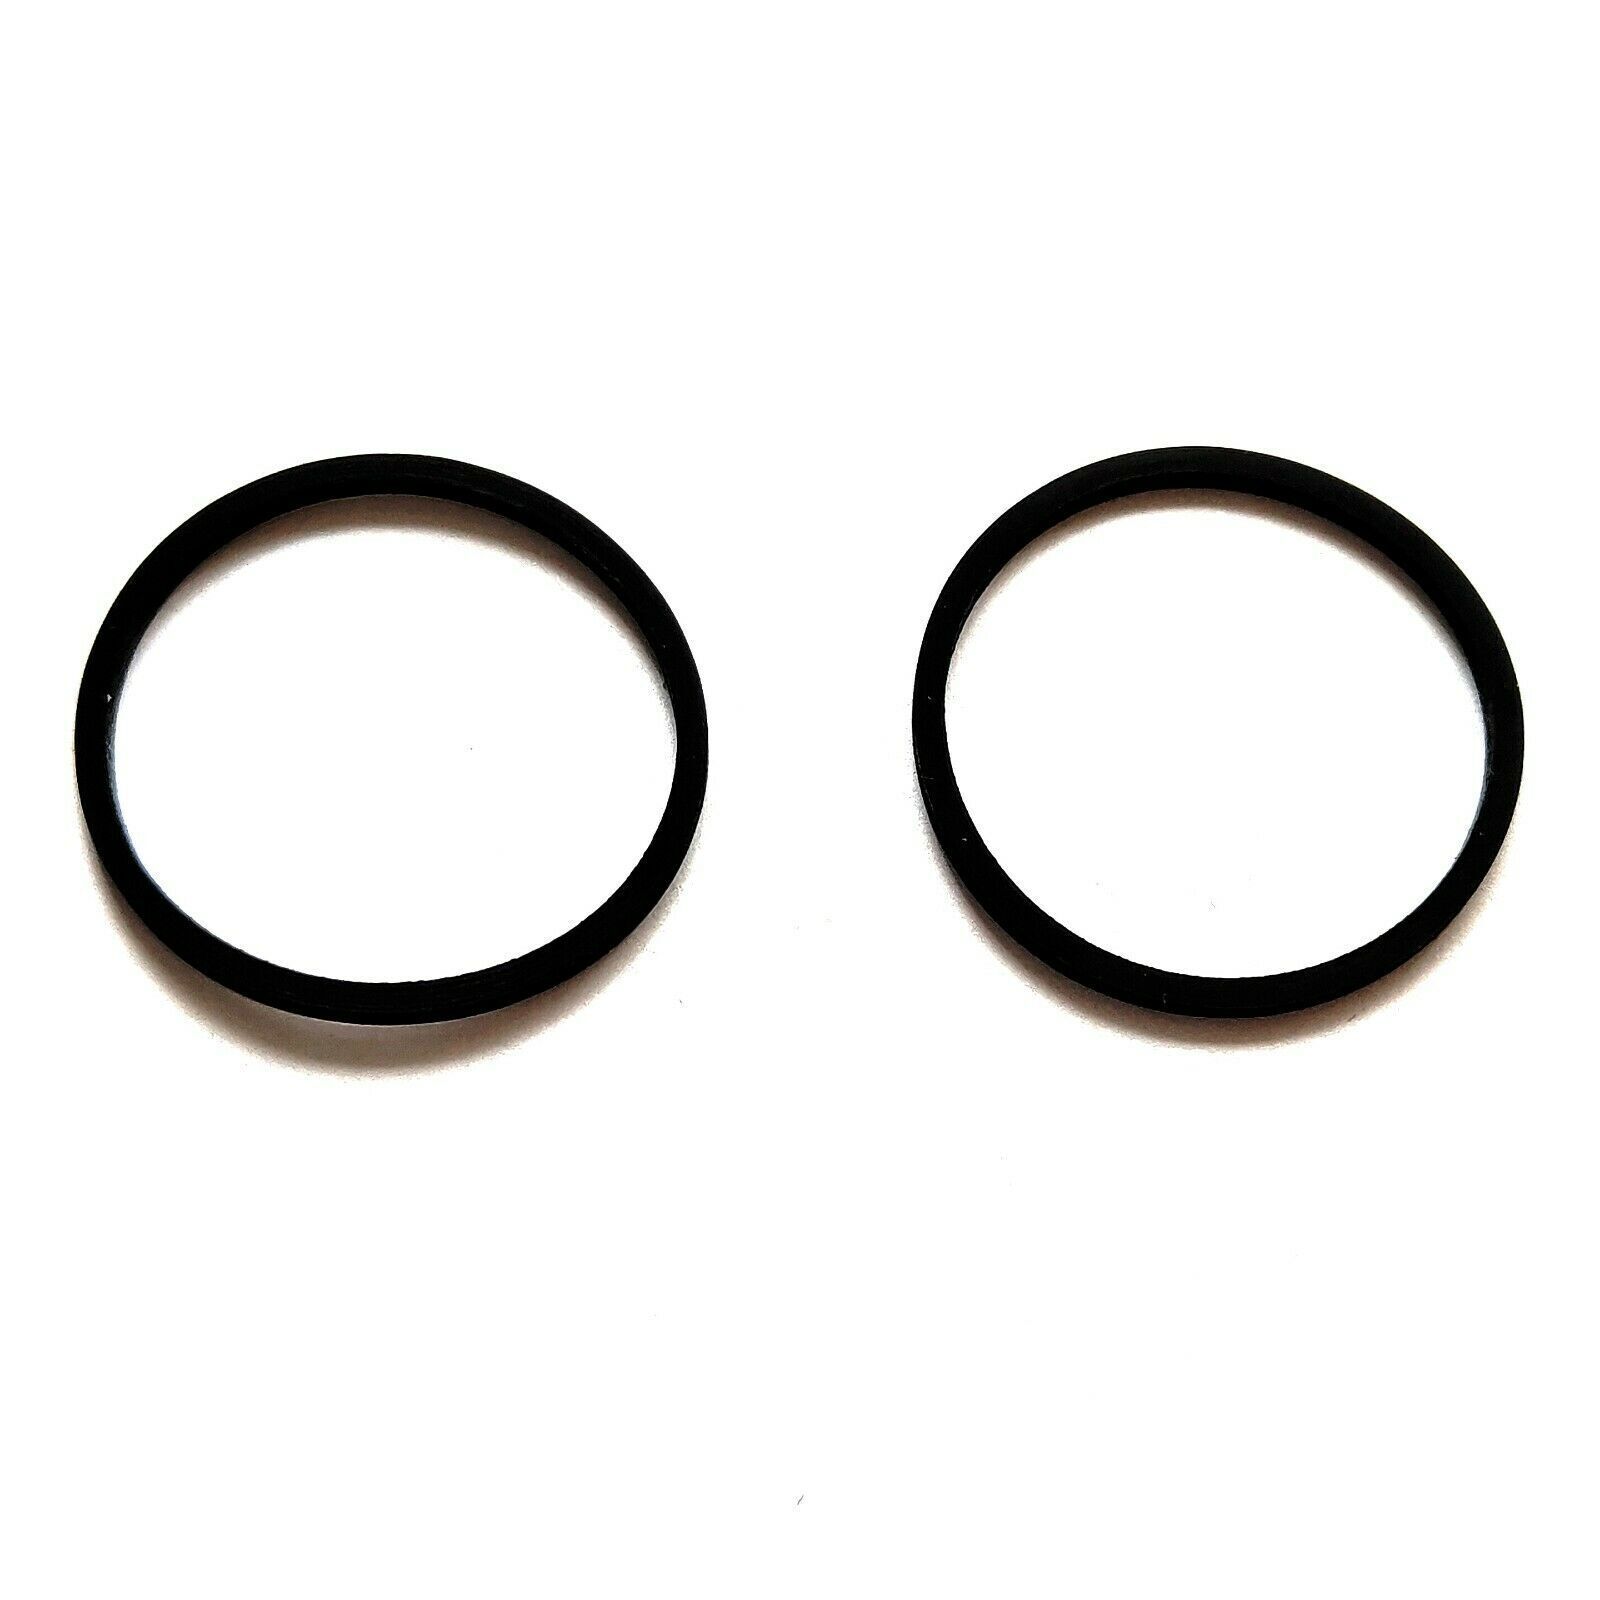 2x Replacement Repair Drive Belt For Sega CD Model 1 & Mega CD System Console Unbranded Does not apply - фотография #3